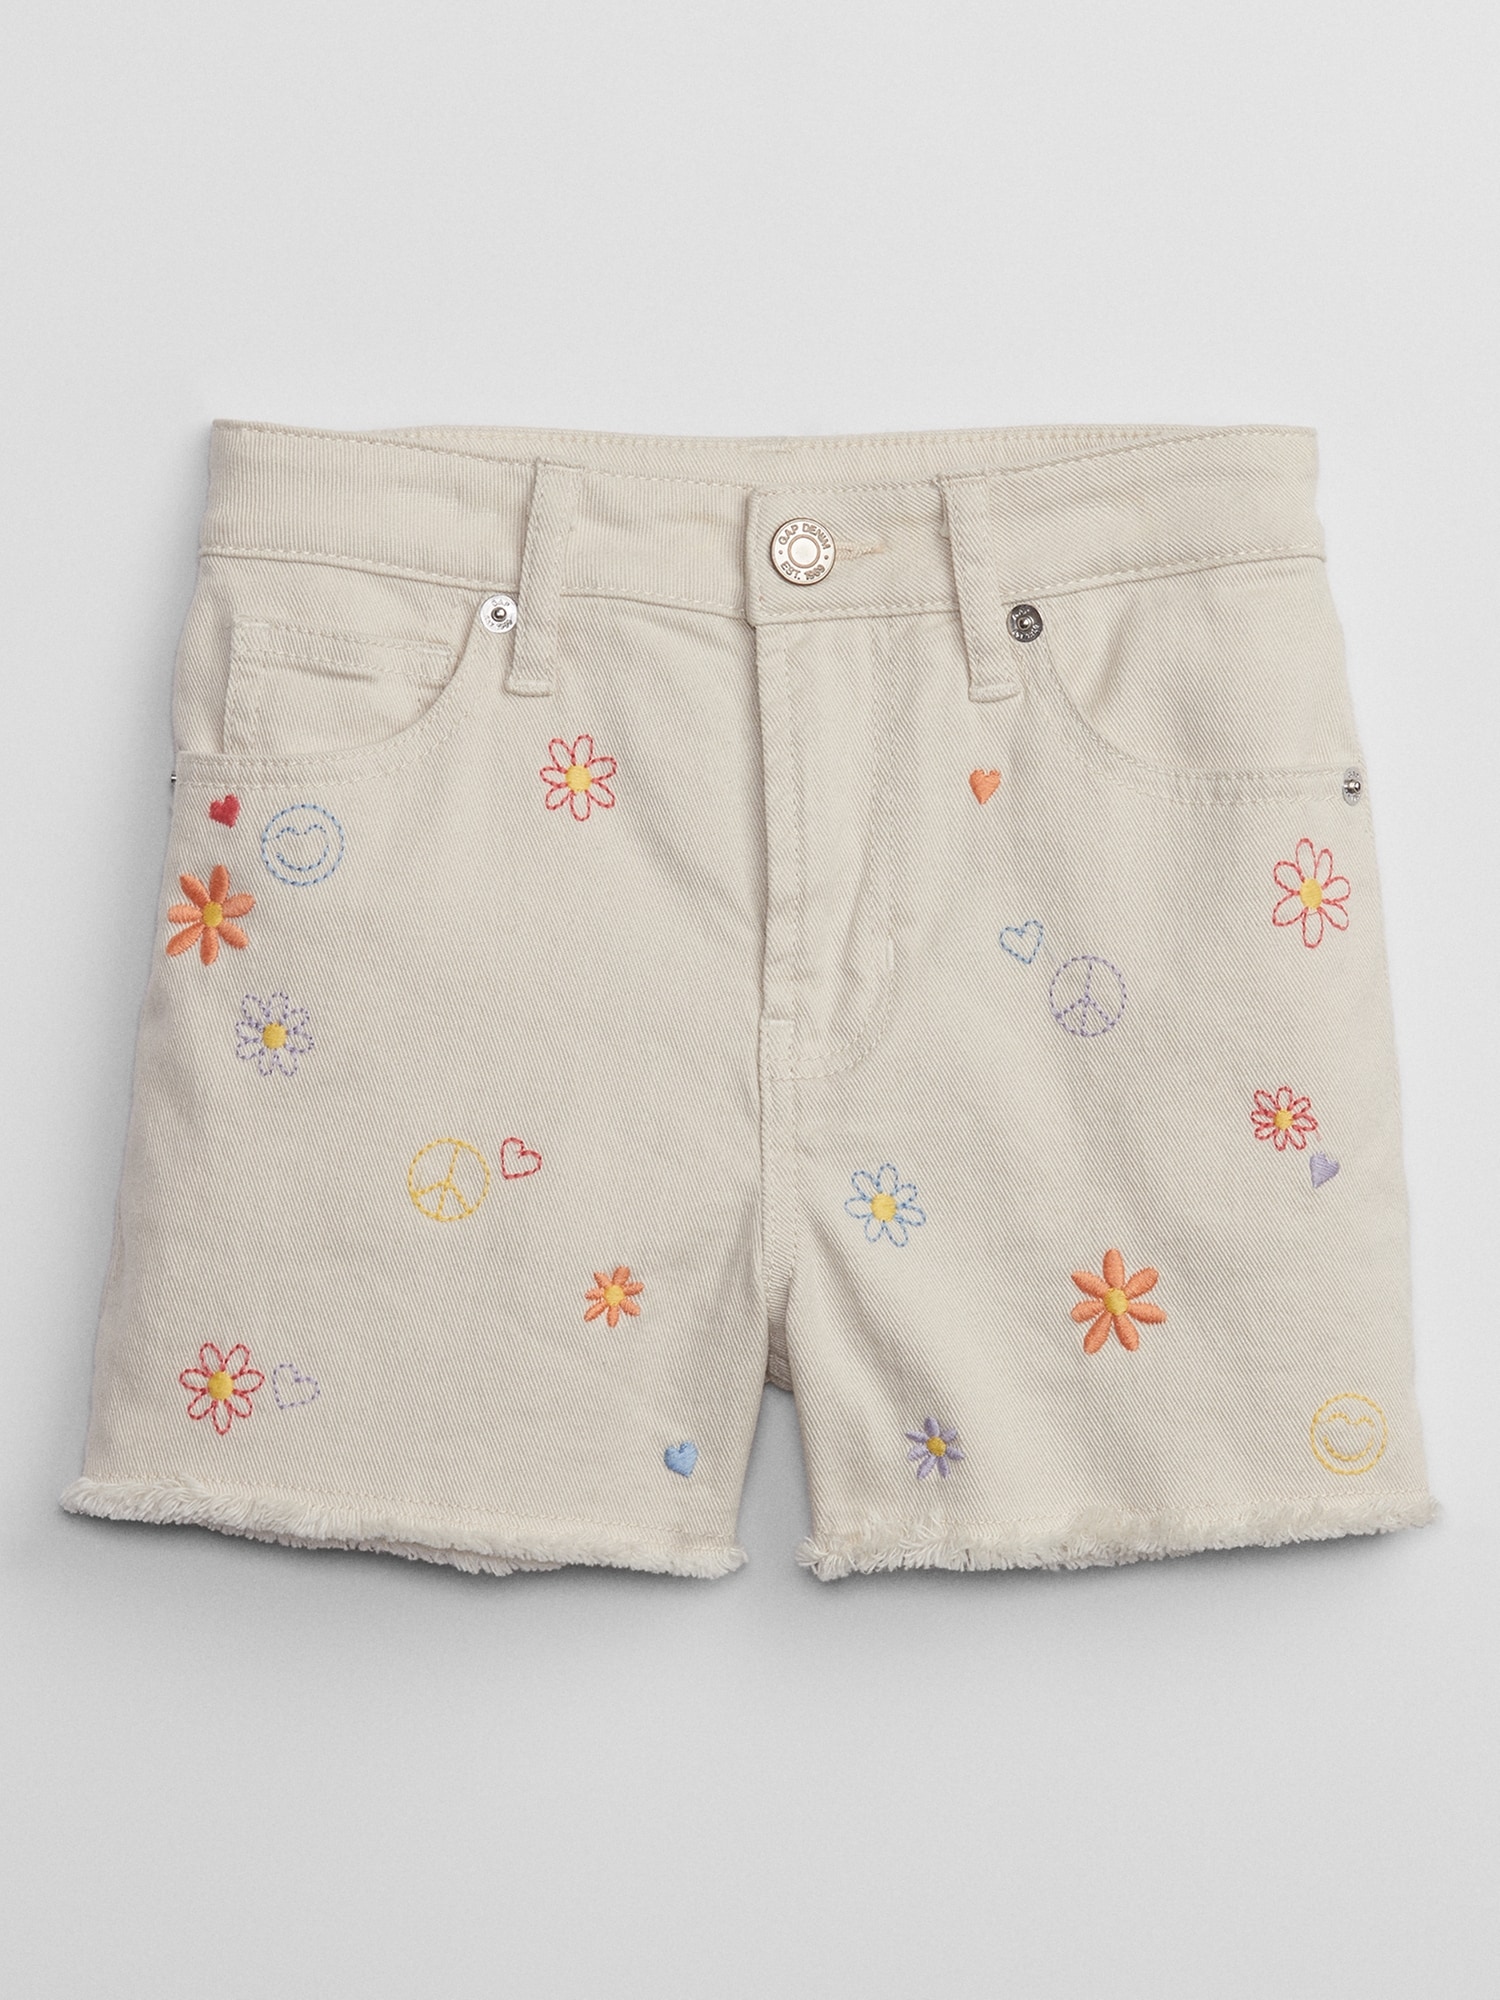 Kids High Rise Embroidered Mom Jean Shorts with Washwell